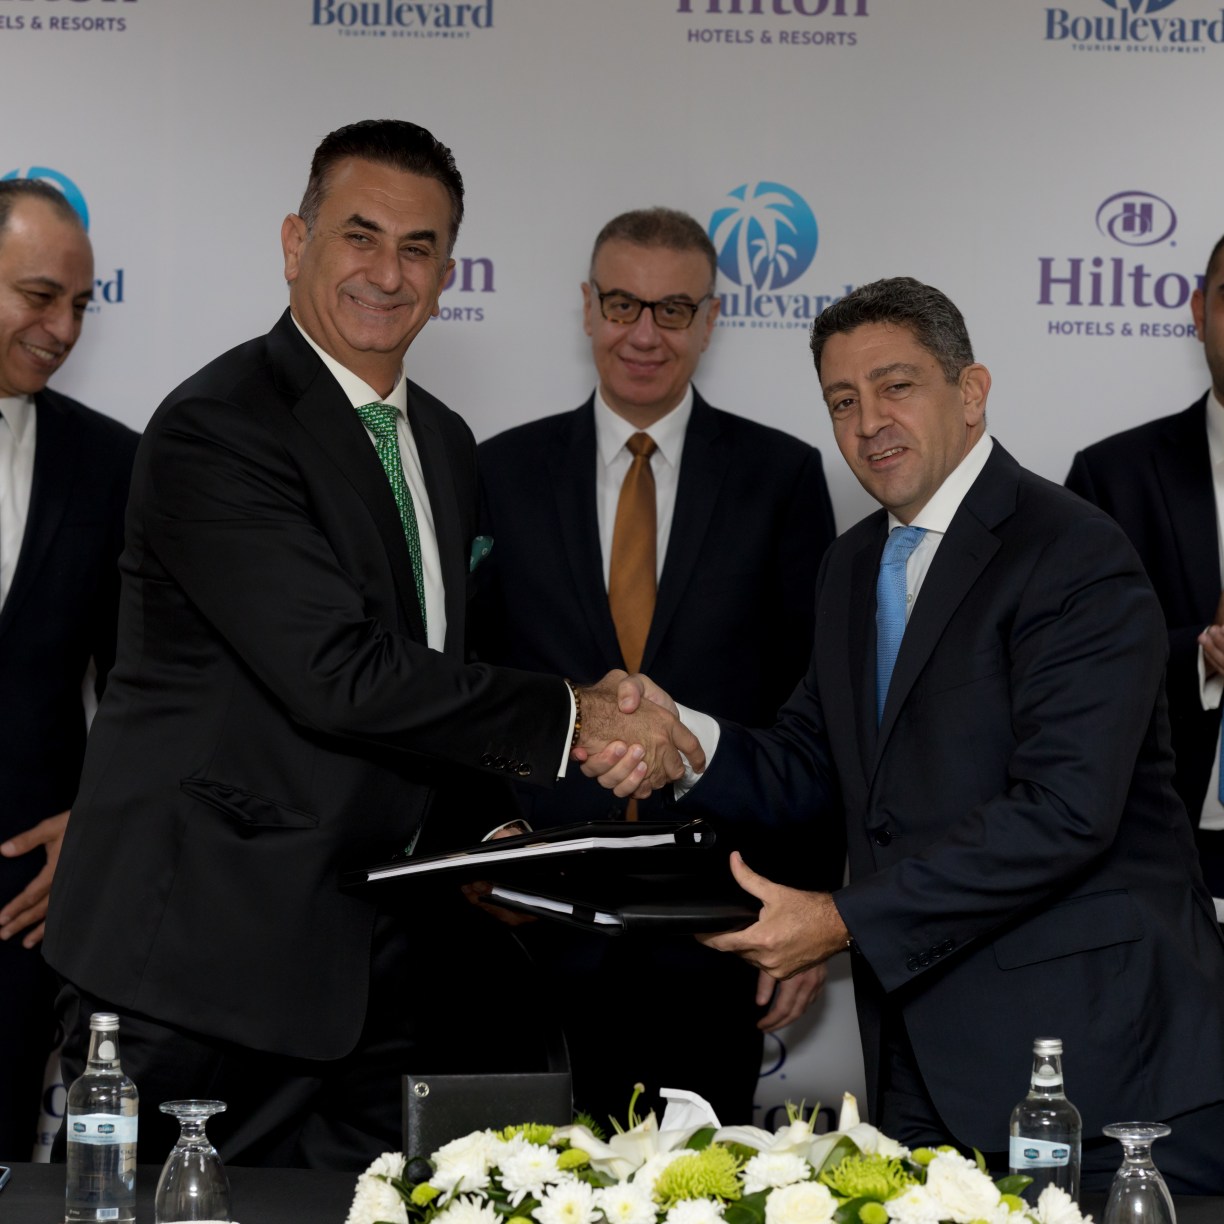 From right to left: Carlos Khneisser, vice president, Development, Middle East & Africa, Hilton shaking hands with Maged Shafik, Founder & Managing Director, Boulevard for Tourism Development.